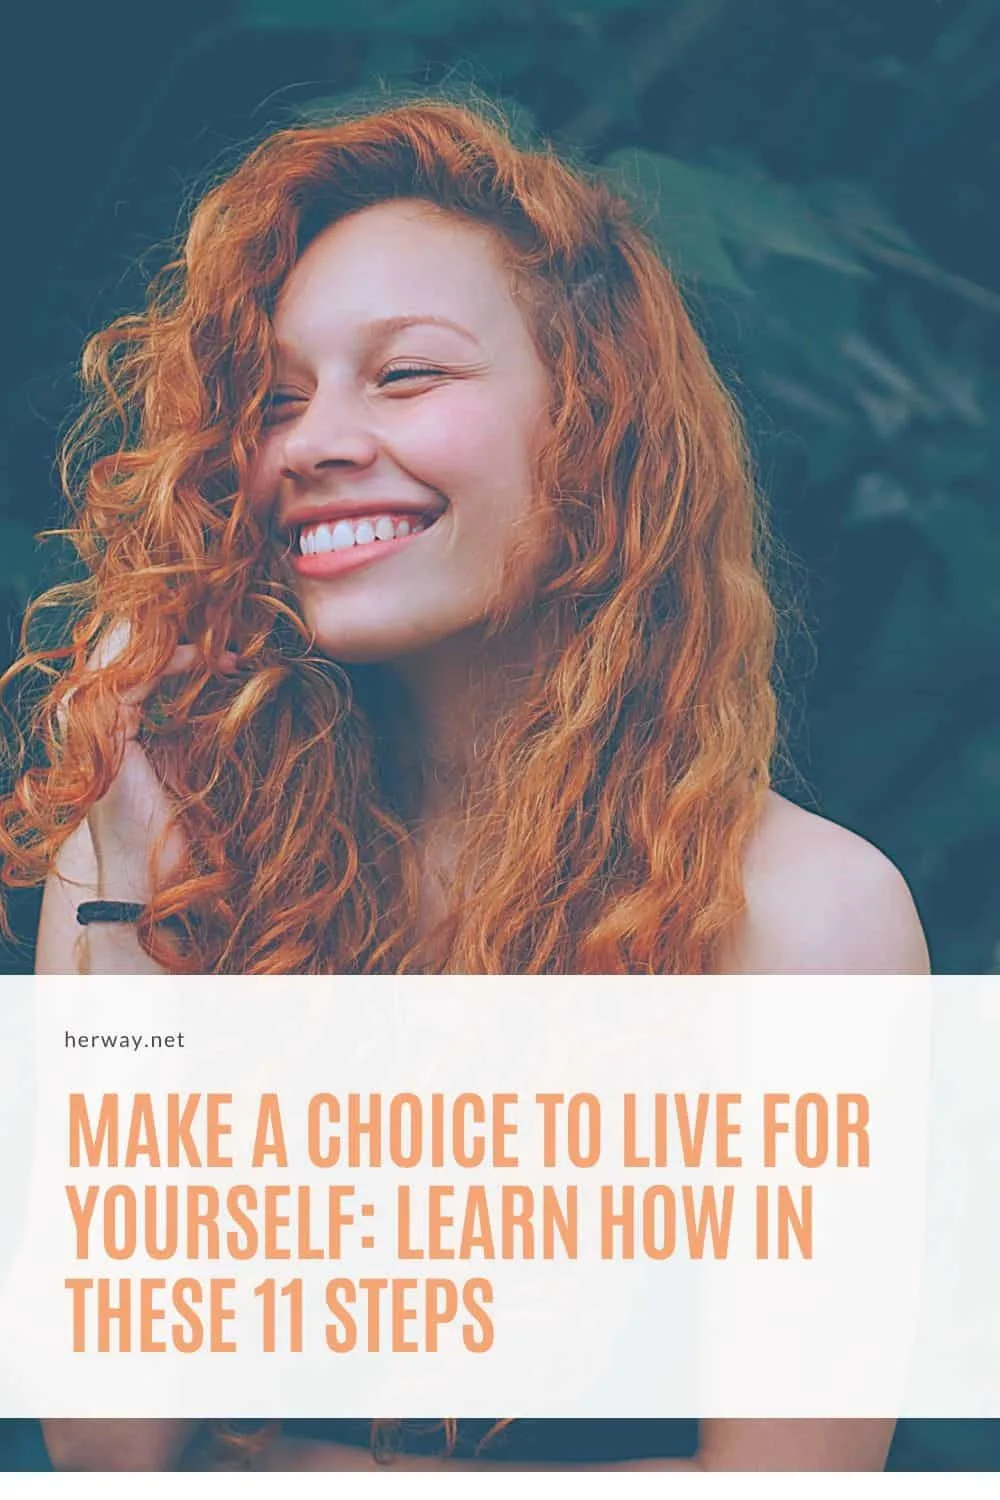 Make A Choice To Live For Yourself: Learn How In These 11 Steps